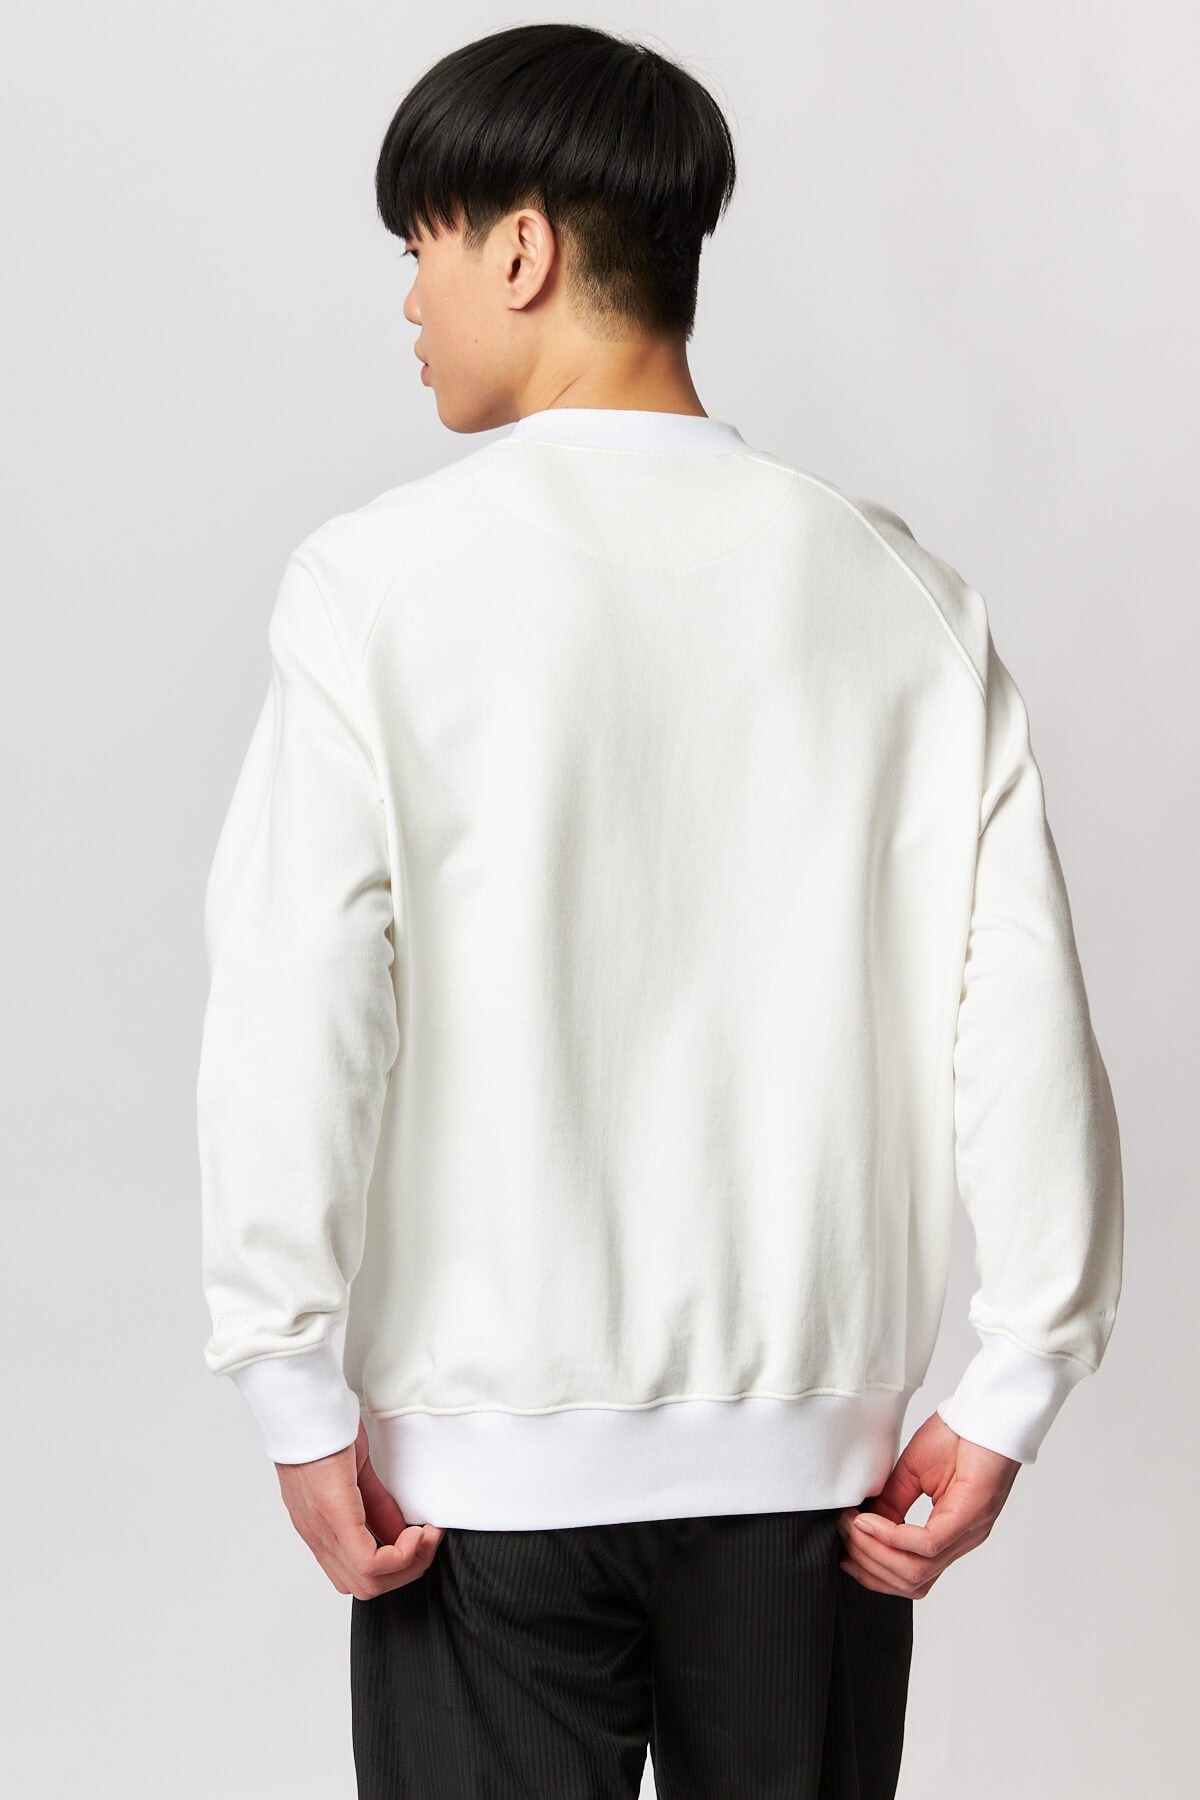 x The Wasted Hour Sweater White